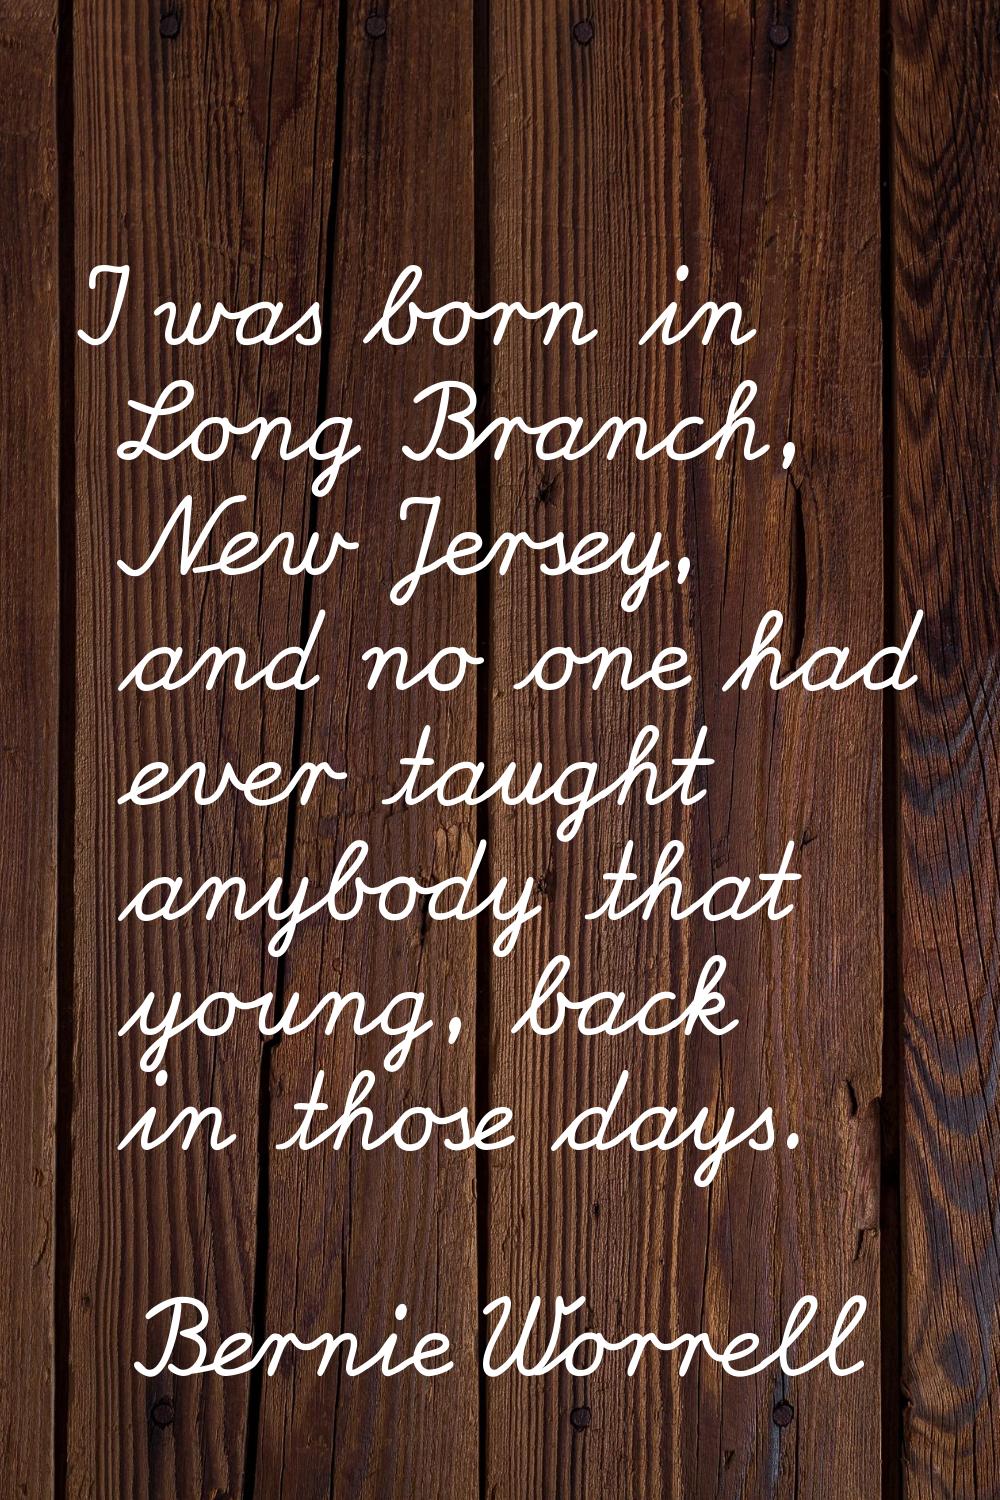 I was born in Long Branch, New Jersey, and no one had ever taught anybody that young, back in those